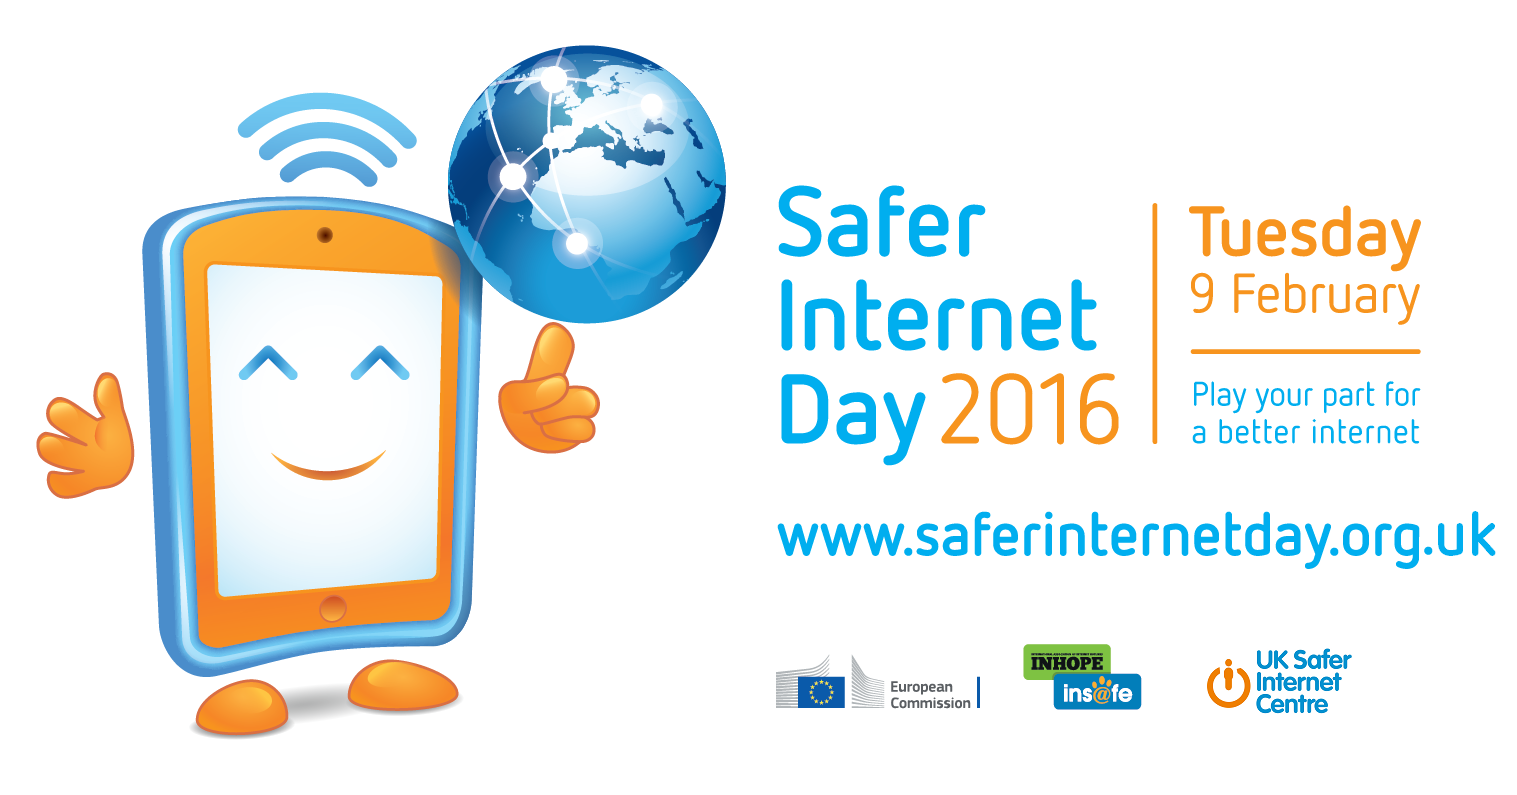 Today Safer Internet Day 2016